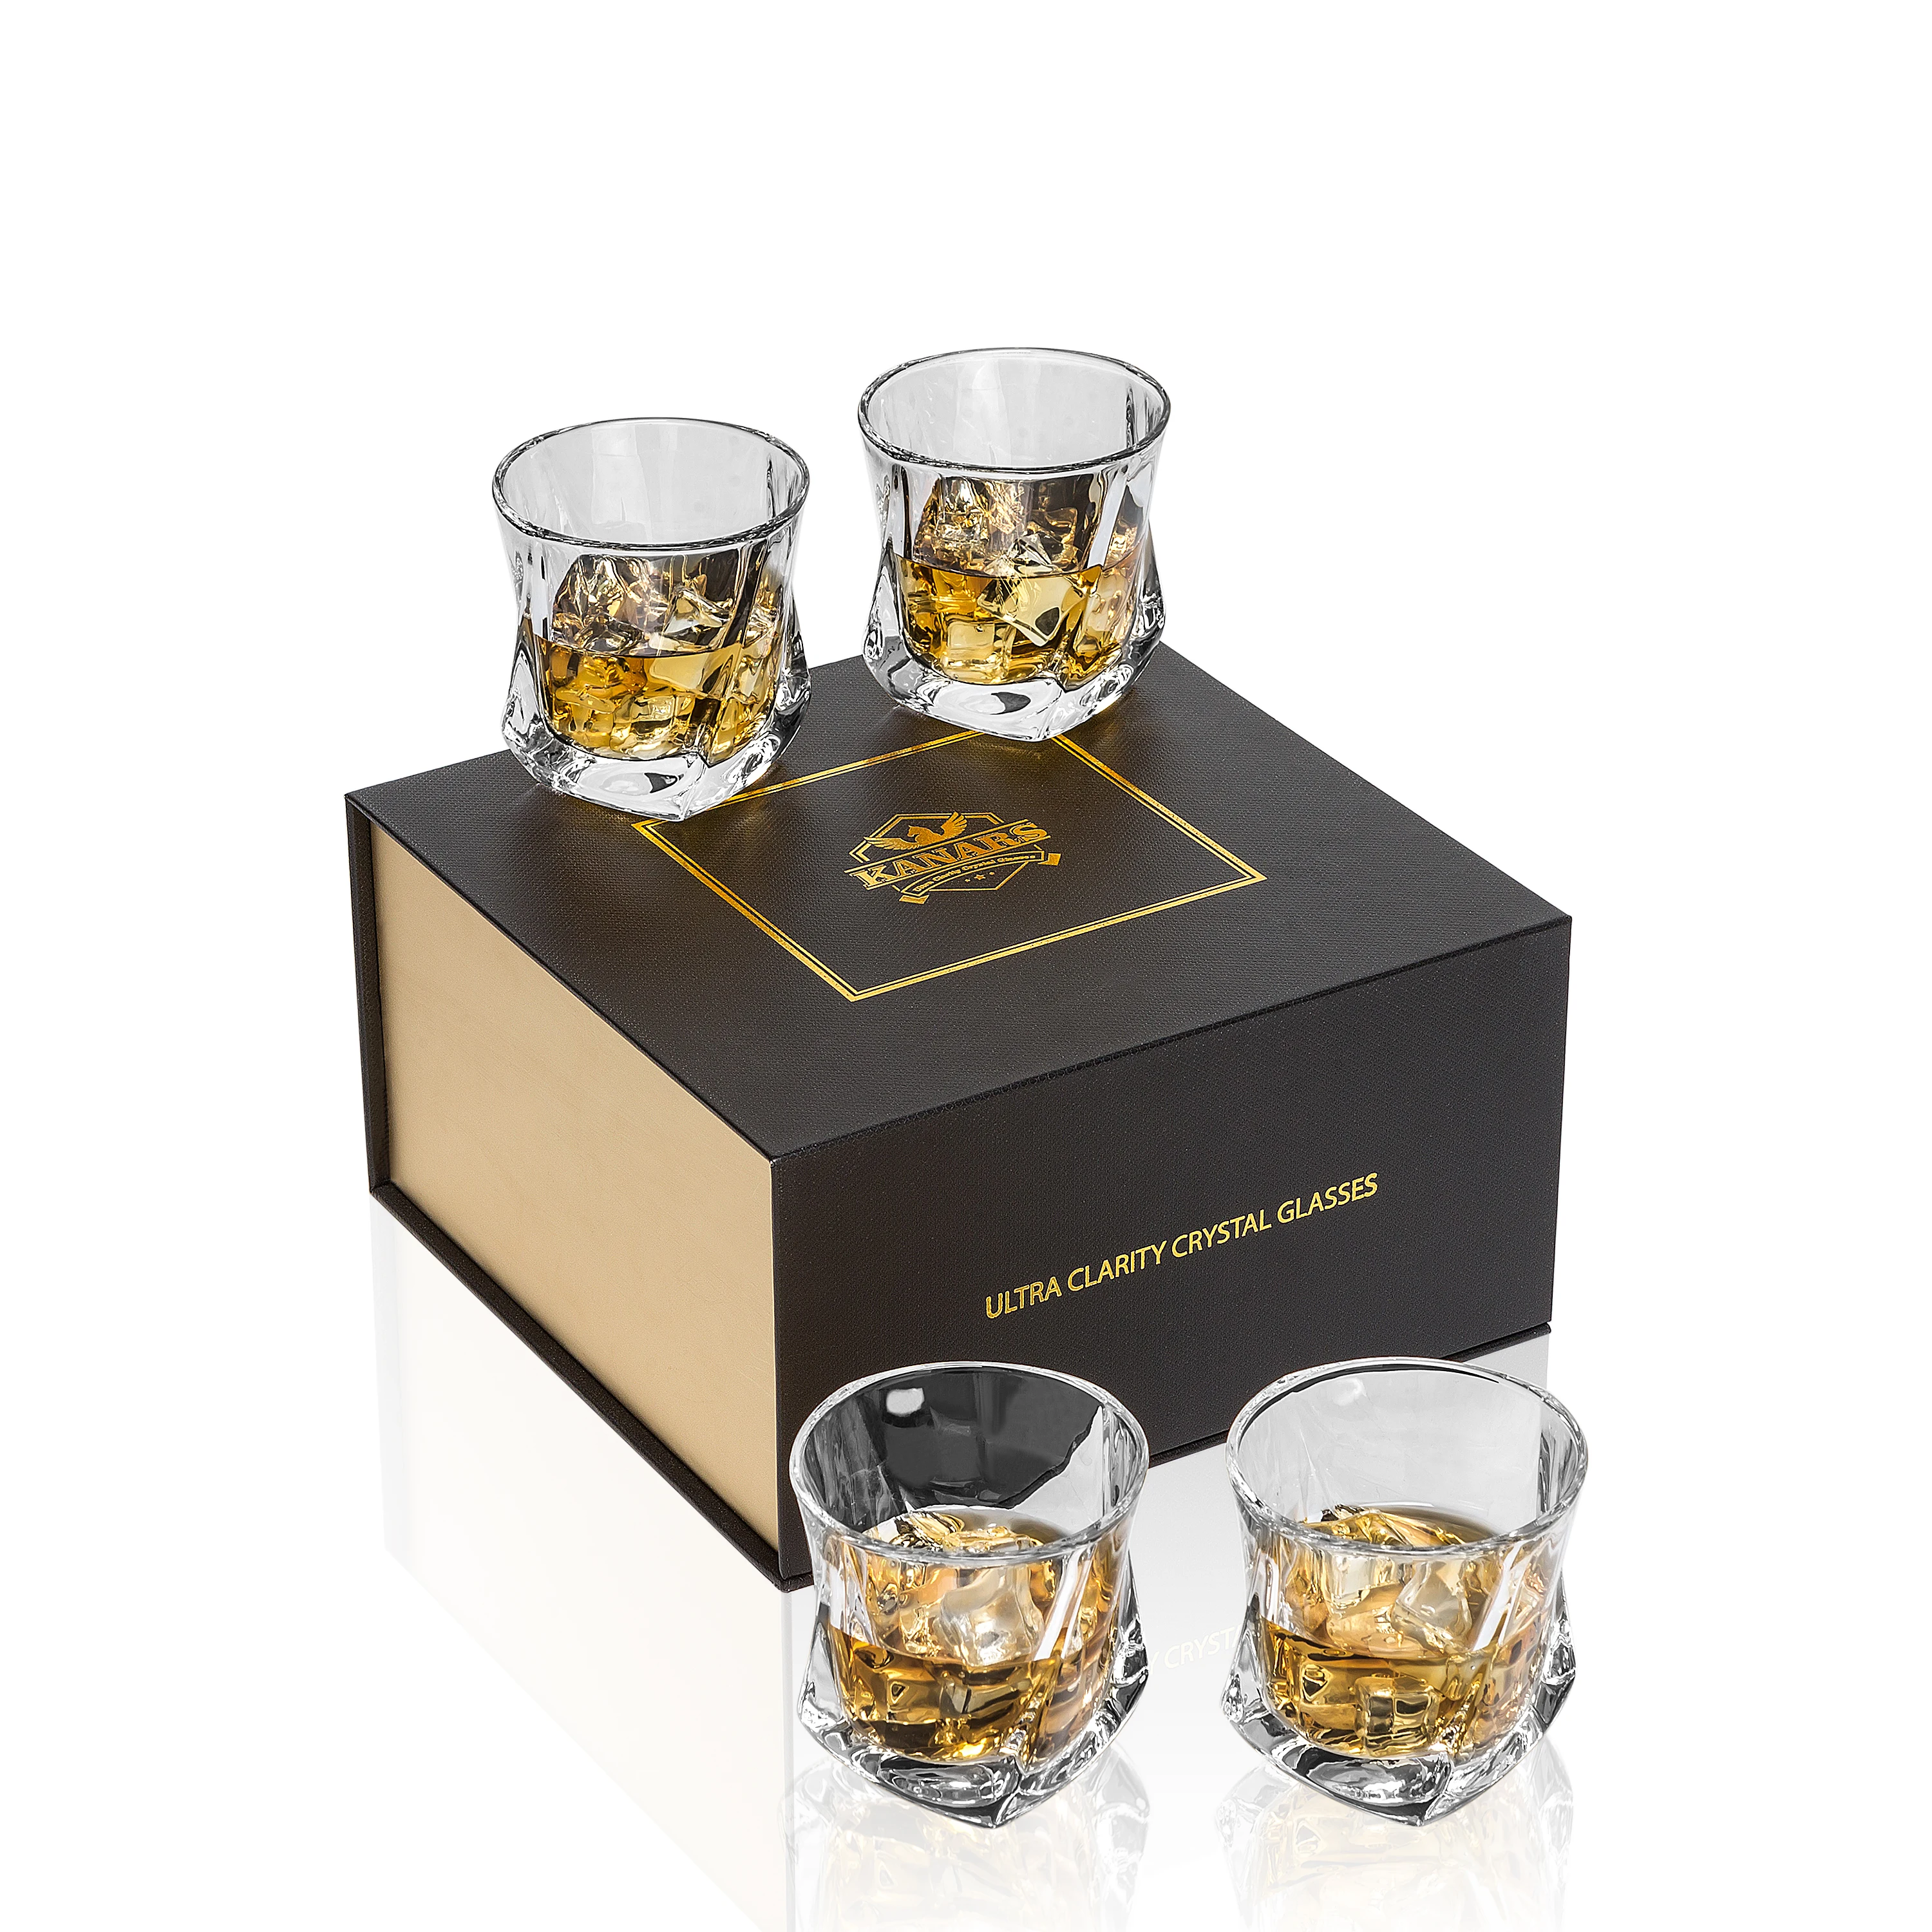 

Whiskey Glasses Set of 4 Old Fashioned Twisted Glass Tumbler Cups 7 oz / 210 ml for Scotch Bourbon Whisky, In Gift Box